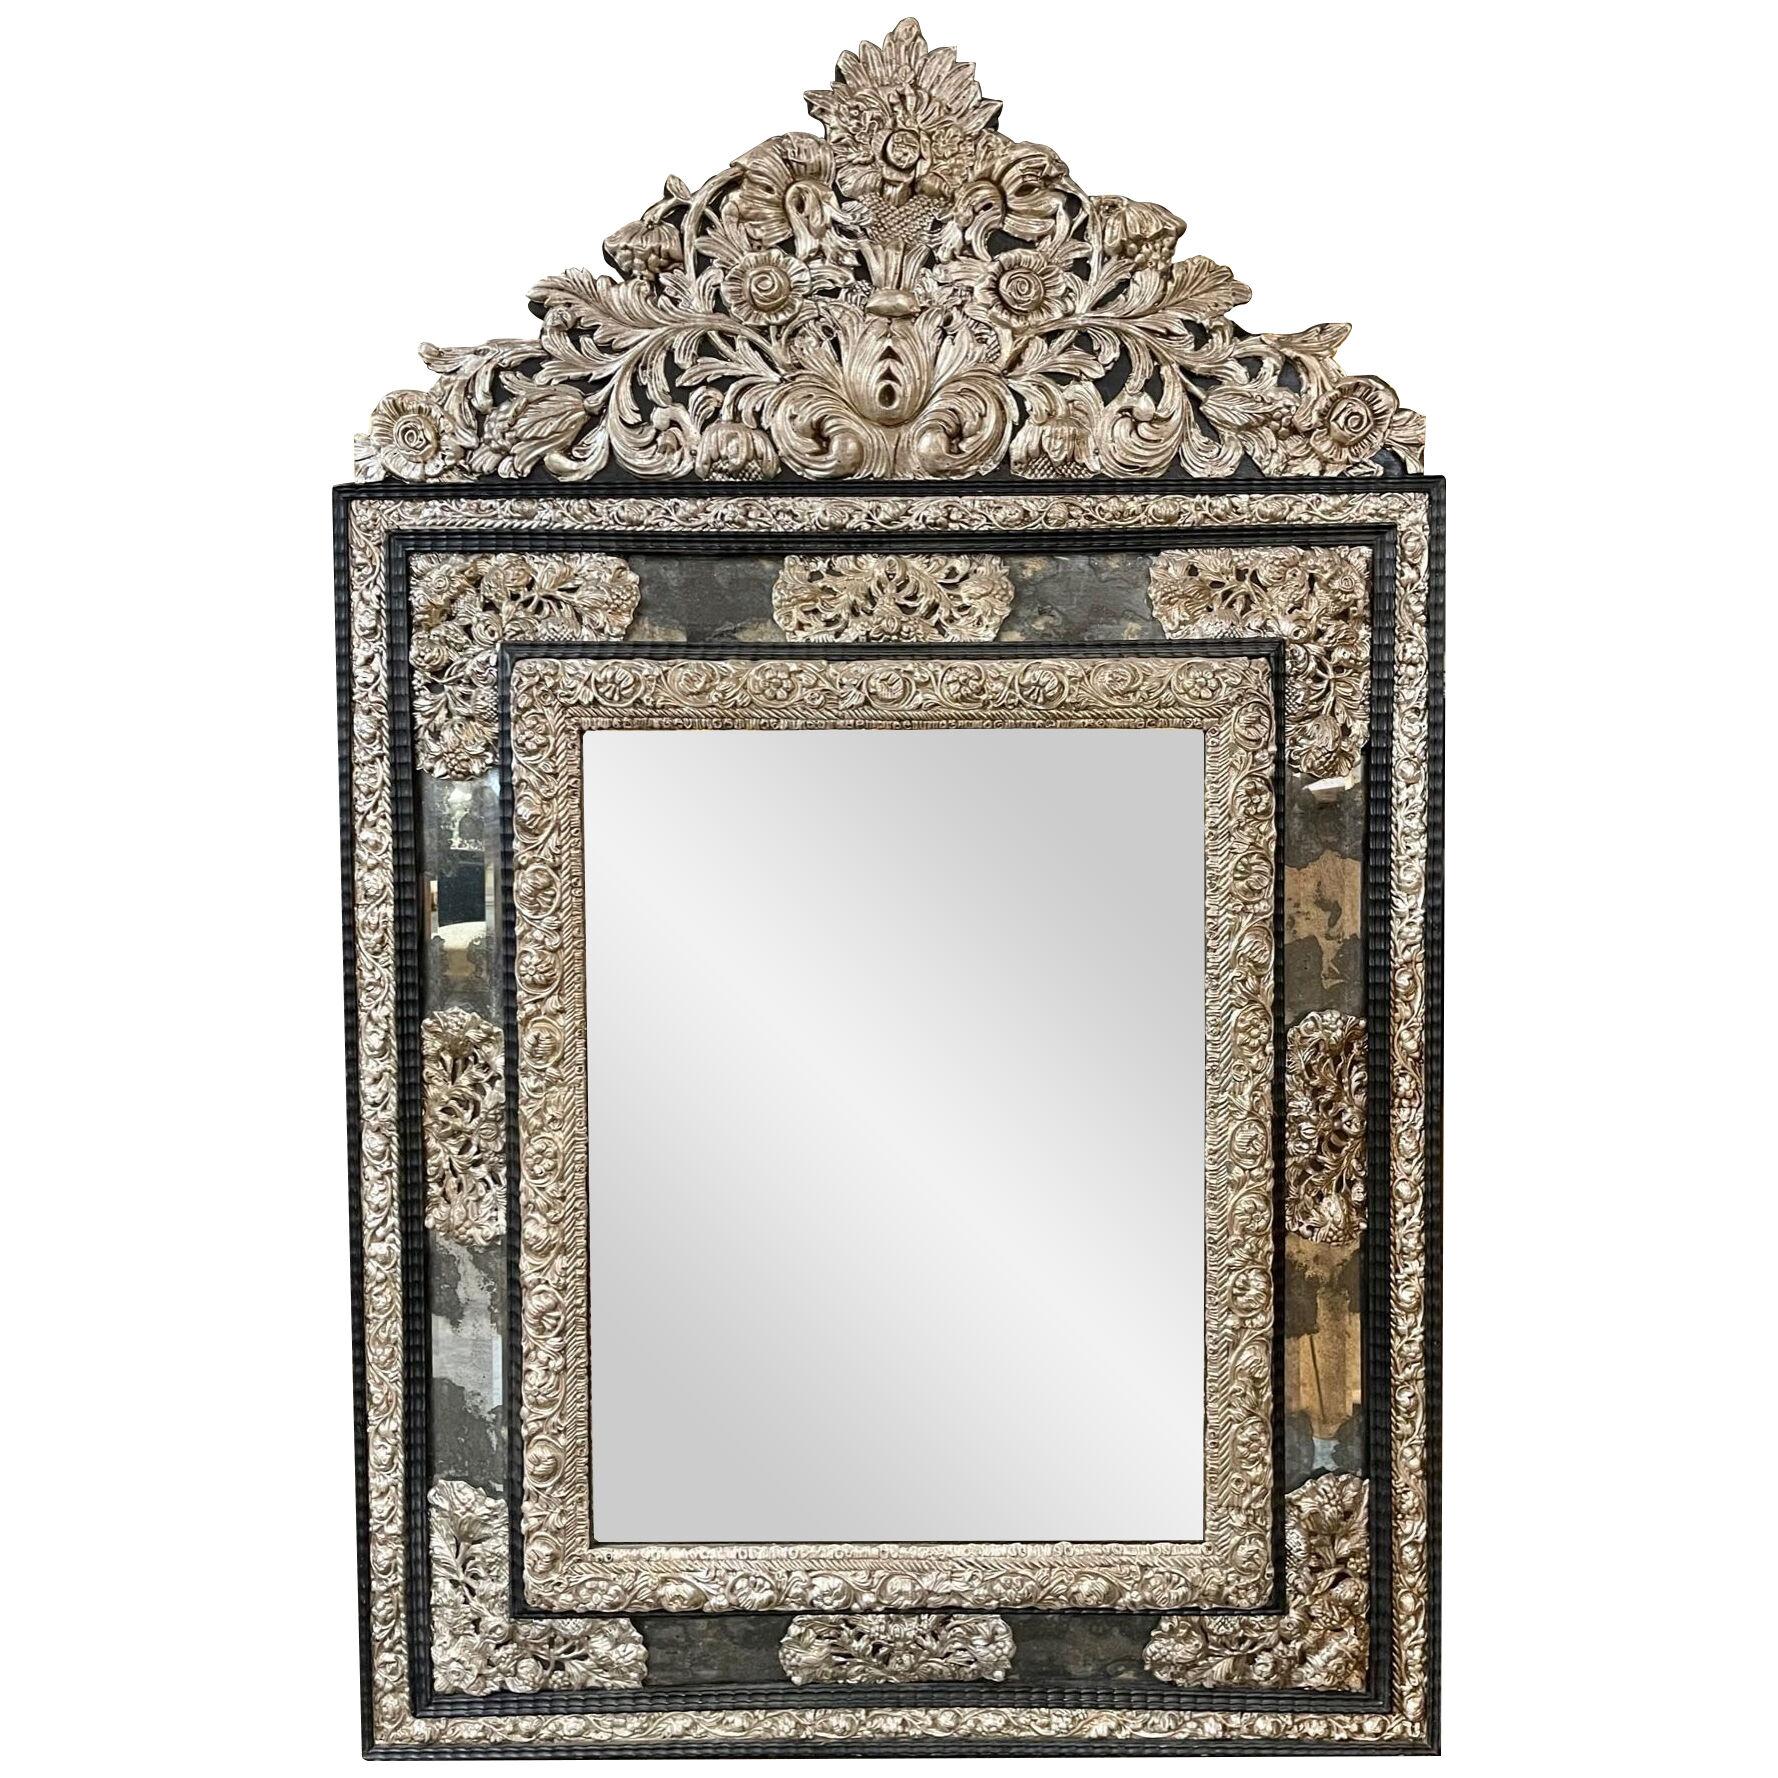 19th Century Dutch Silver Repousse' Brass and Ebonized Mirror